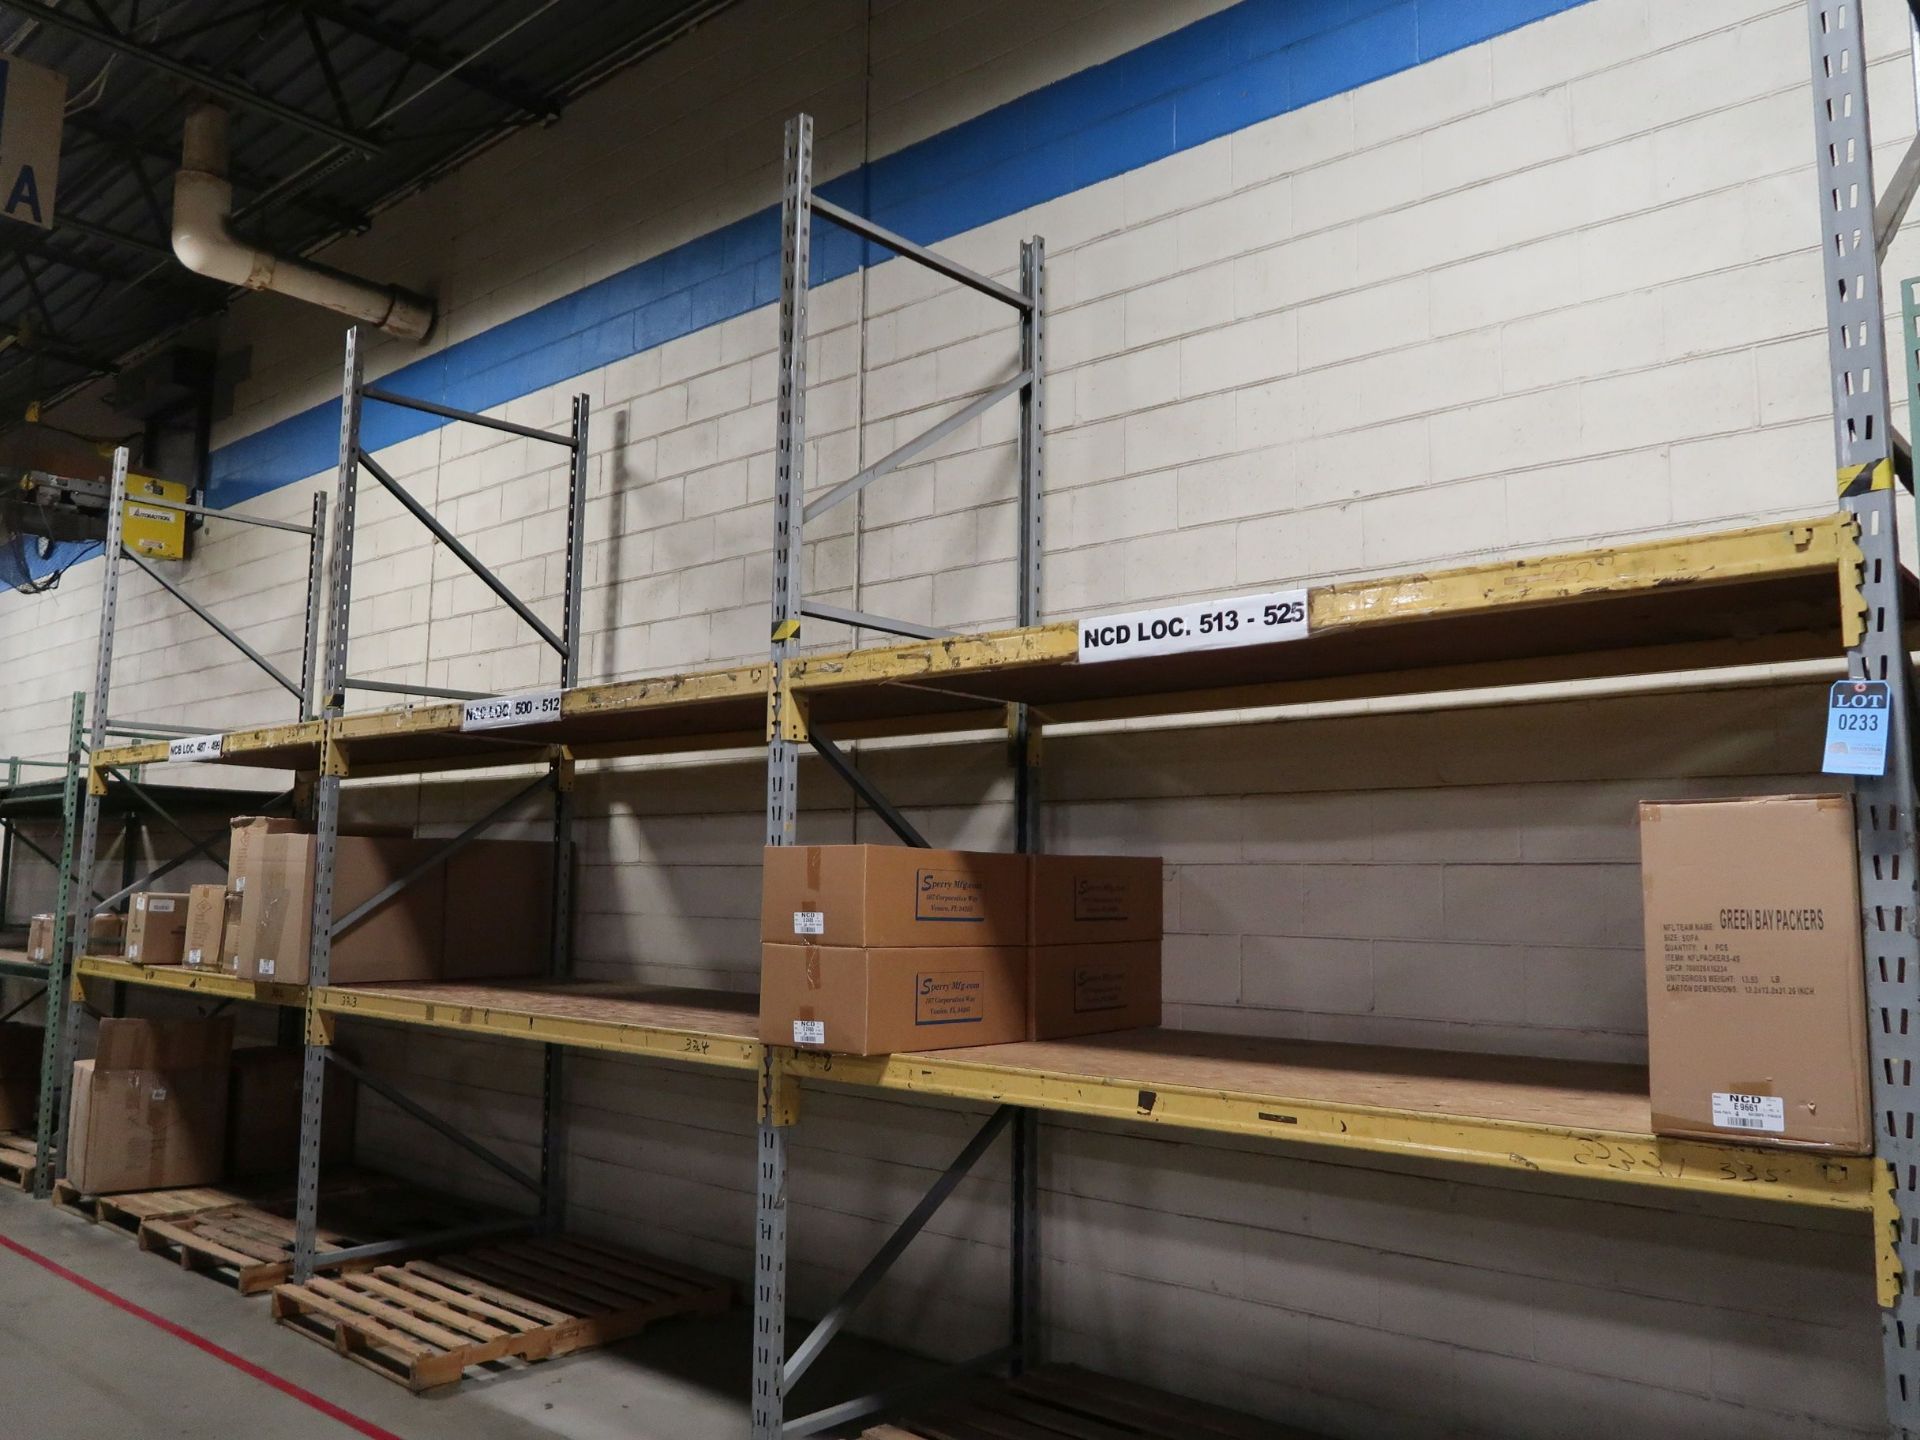 SECTIONS 96" X 42" X 144" ADJUSTABLE BEAM PALLET RACK; (3) 42" X 144" UPRIGHTS, (12) 96" CROSSBEAMS